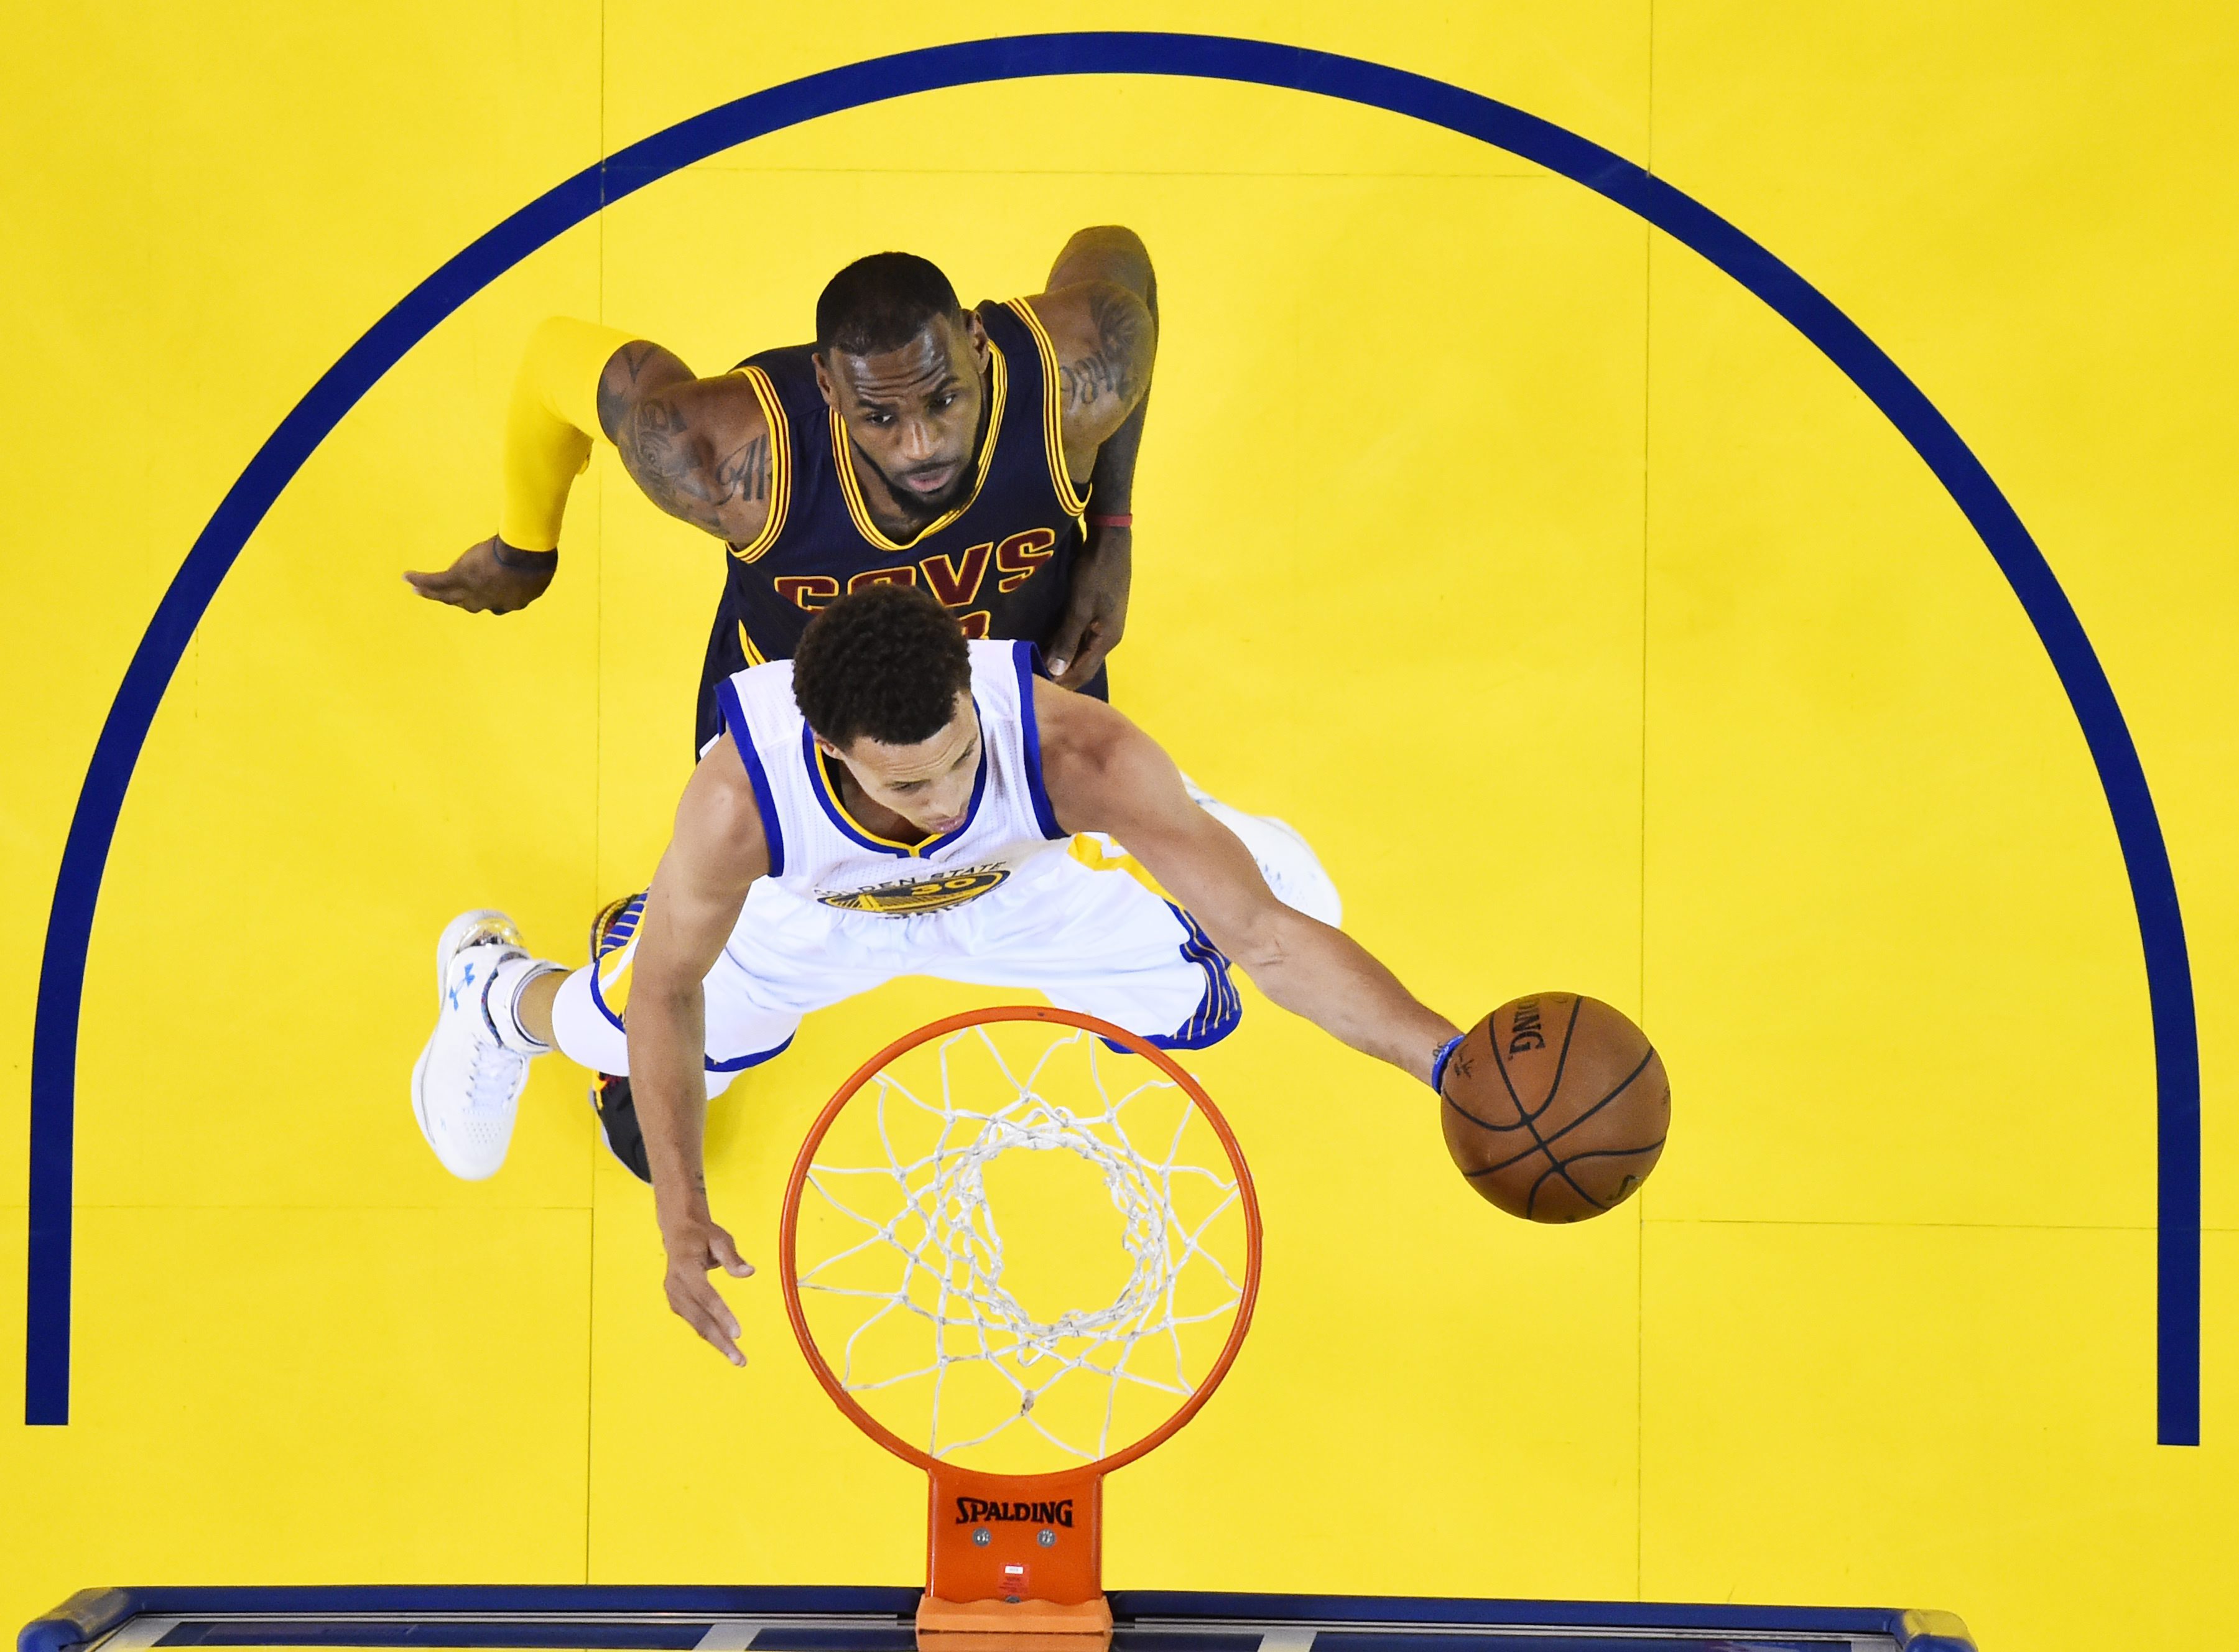 LeBron James tries to block a shot against  Stephen Curry. Photo: EPA